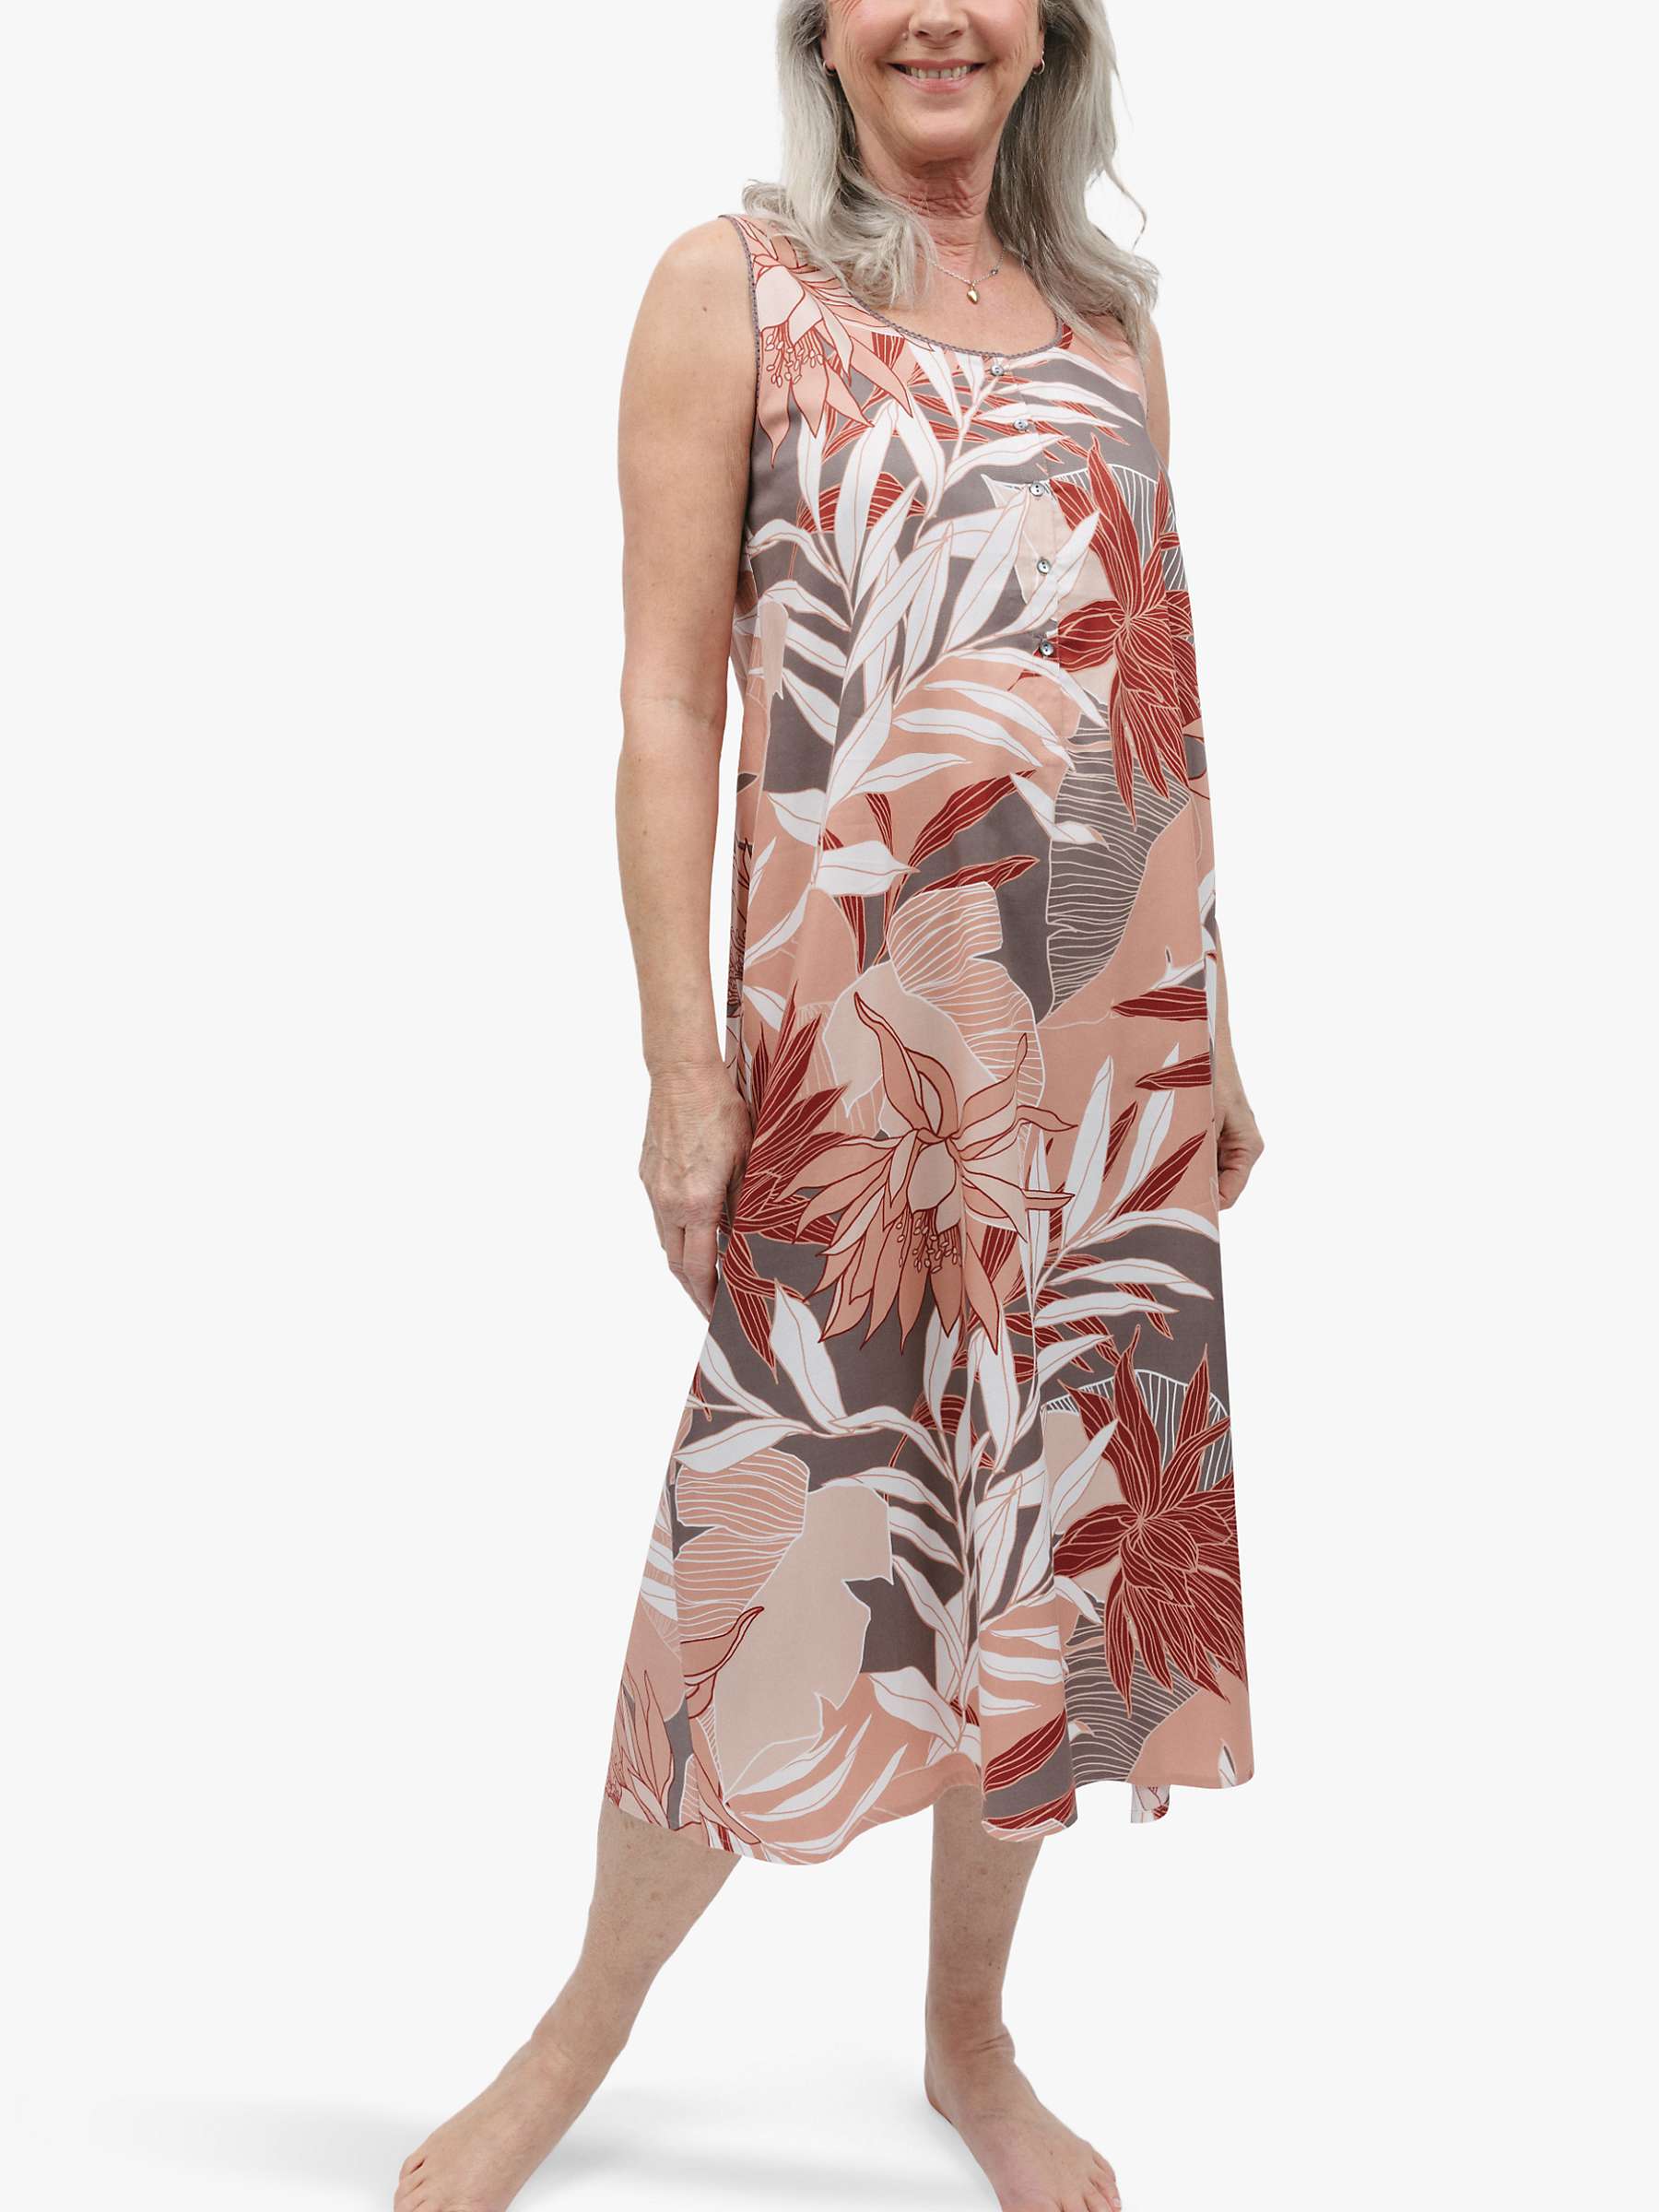 Buy Cyberjammies Evette Floral Sleeveless Nightdress, Taupe Online at johnlewis.com